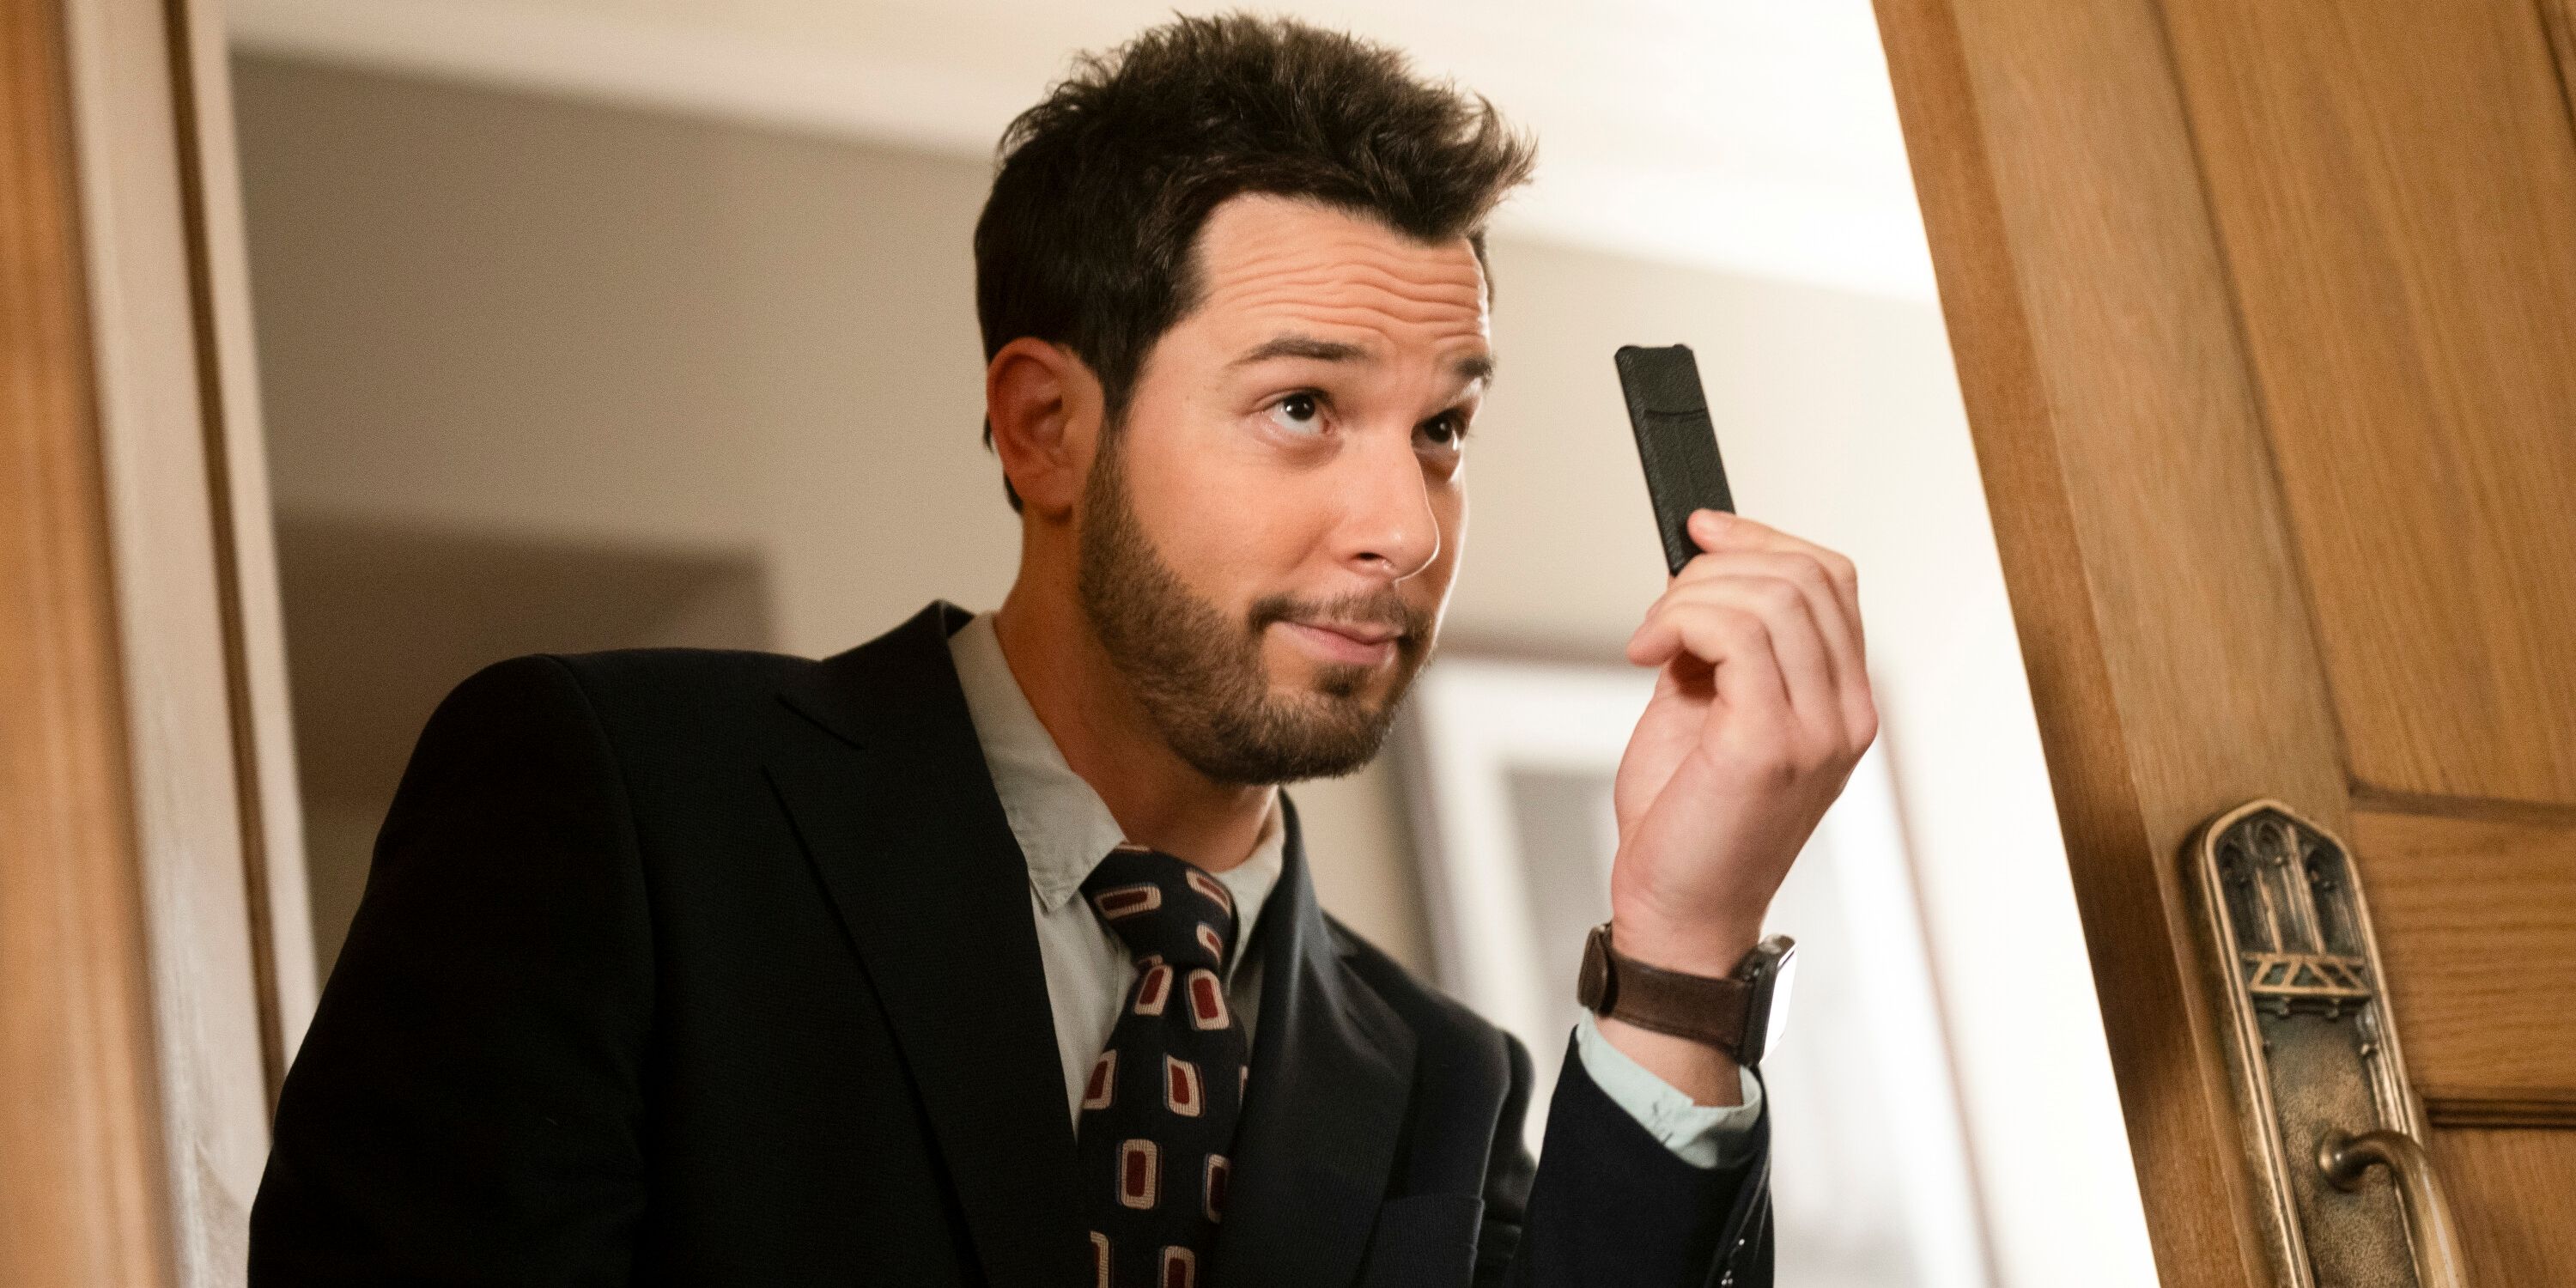 Skylar Astin as Todd holding something up in Episode 2 of Season 2 of CBS' So Help Me Todd